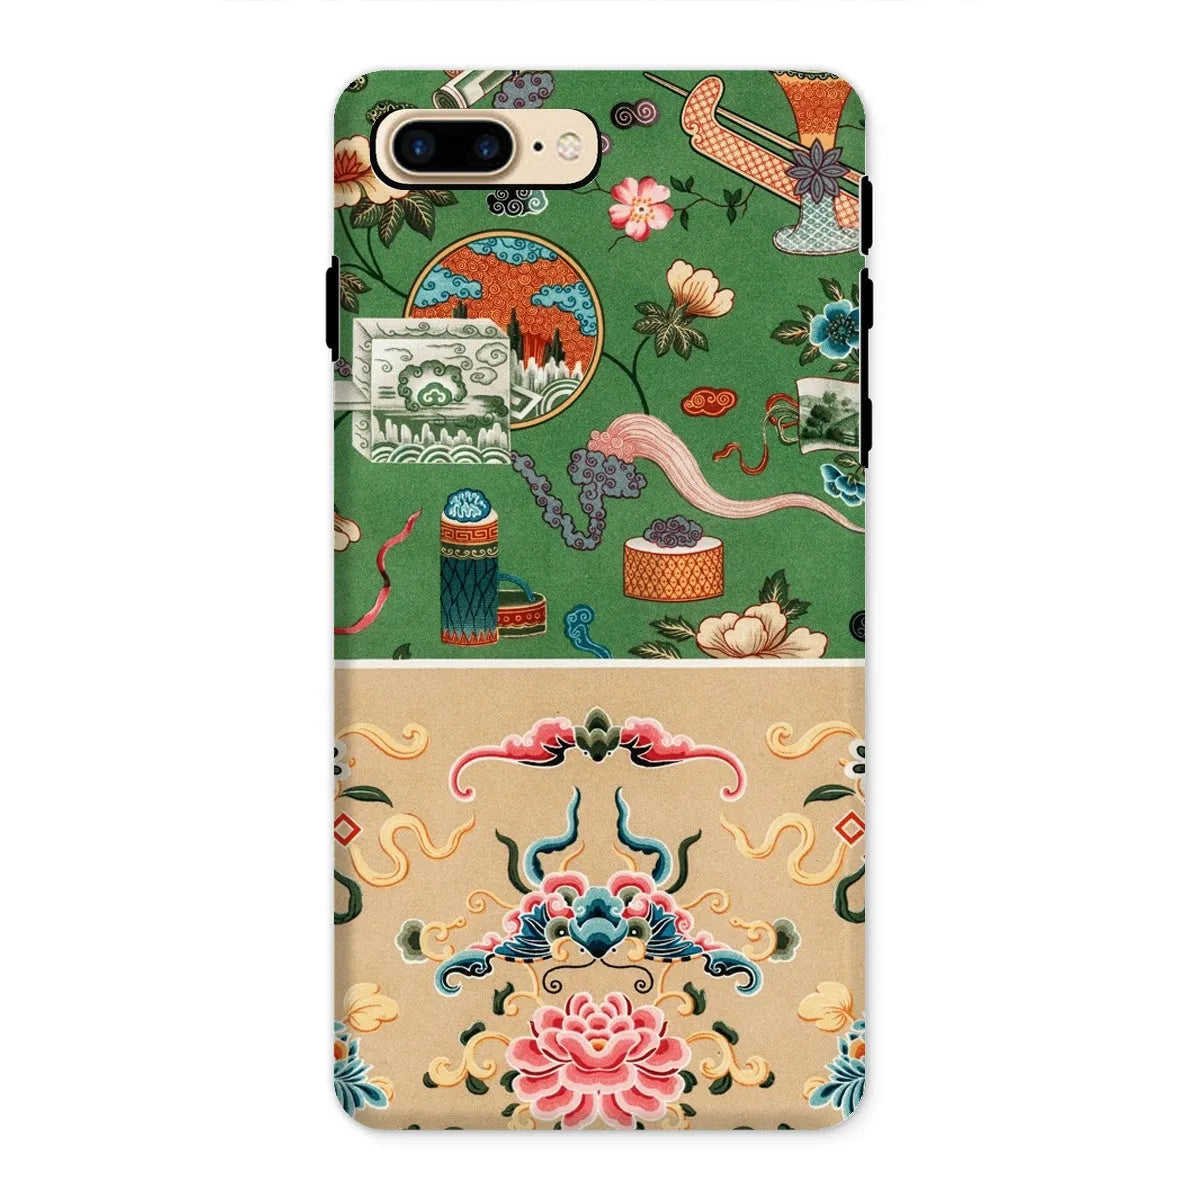 This Chinese Pattern By Auguste Racinet Tough Phone Case - Iphone 8 Plus / Matte - Mobile Phone Cases - Aesthetic Art